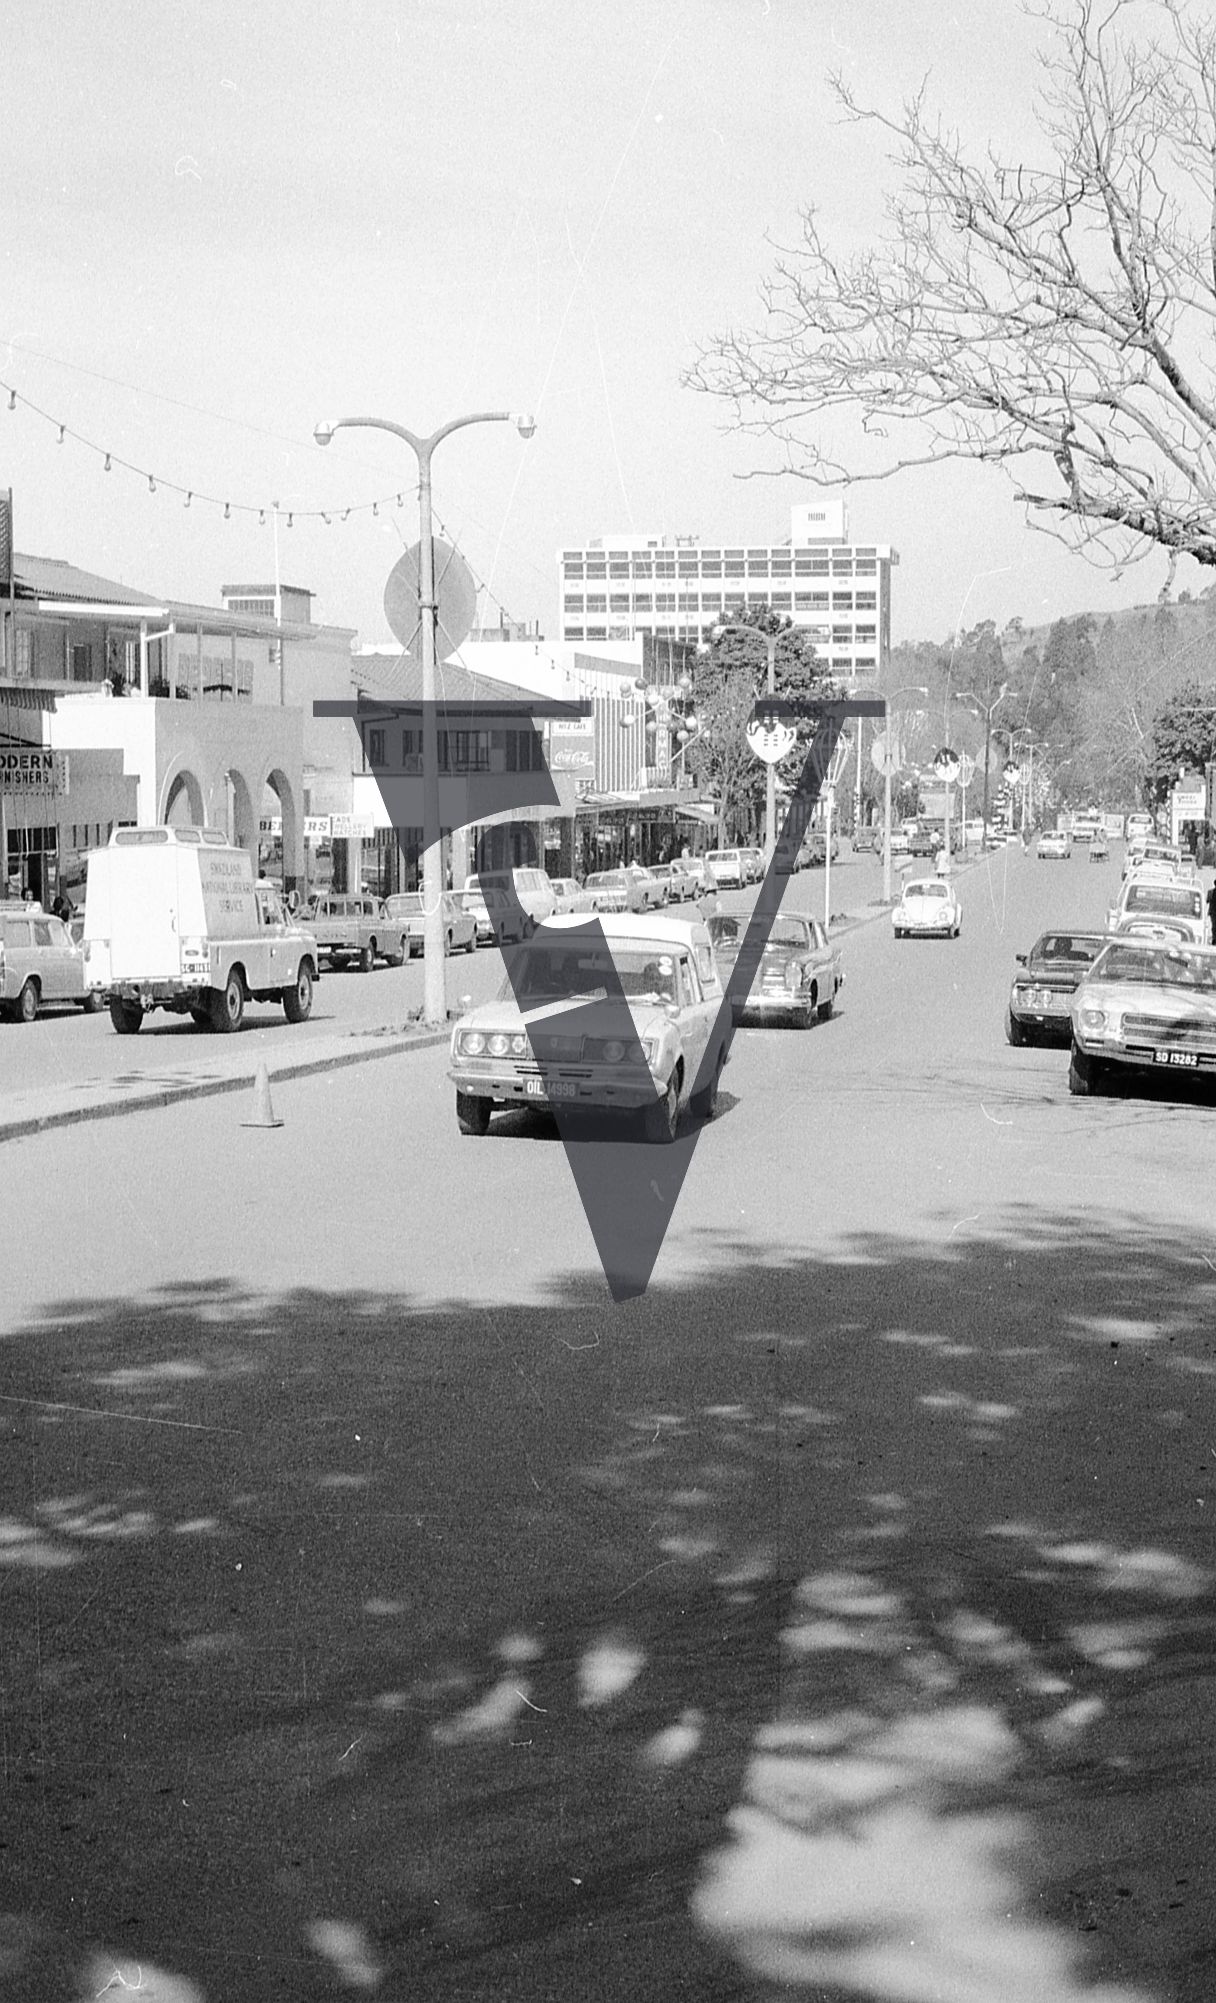 South Africa, Johannesburg, main road, vehicles.